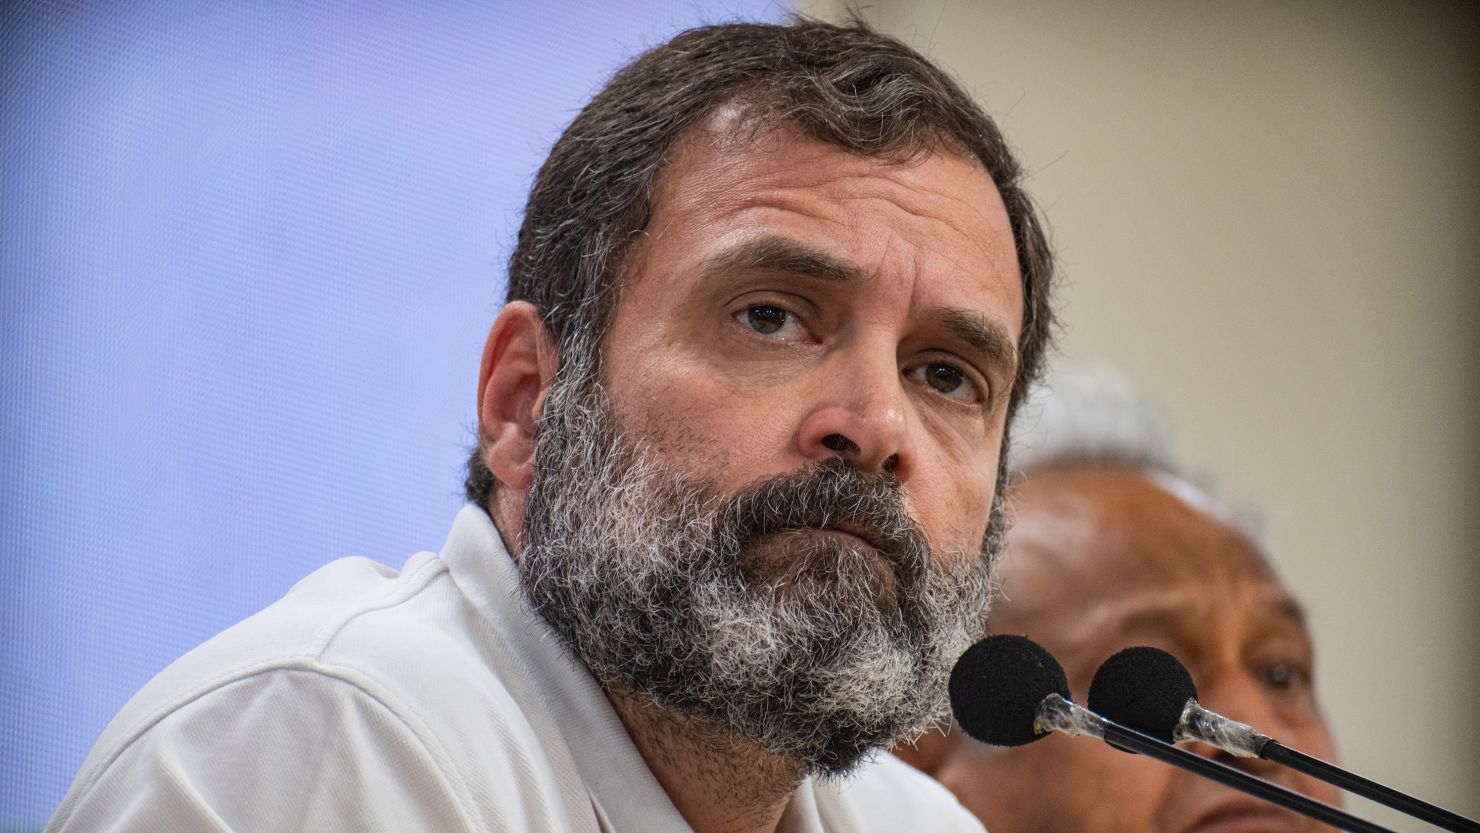 Rahul Gandhi says disqualification from parliament will not stop him questioning Prime Minister Narendra Modi.